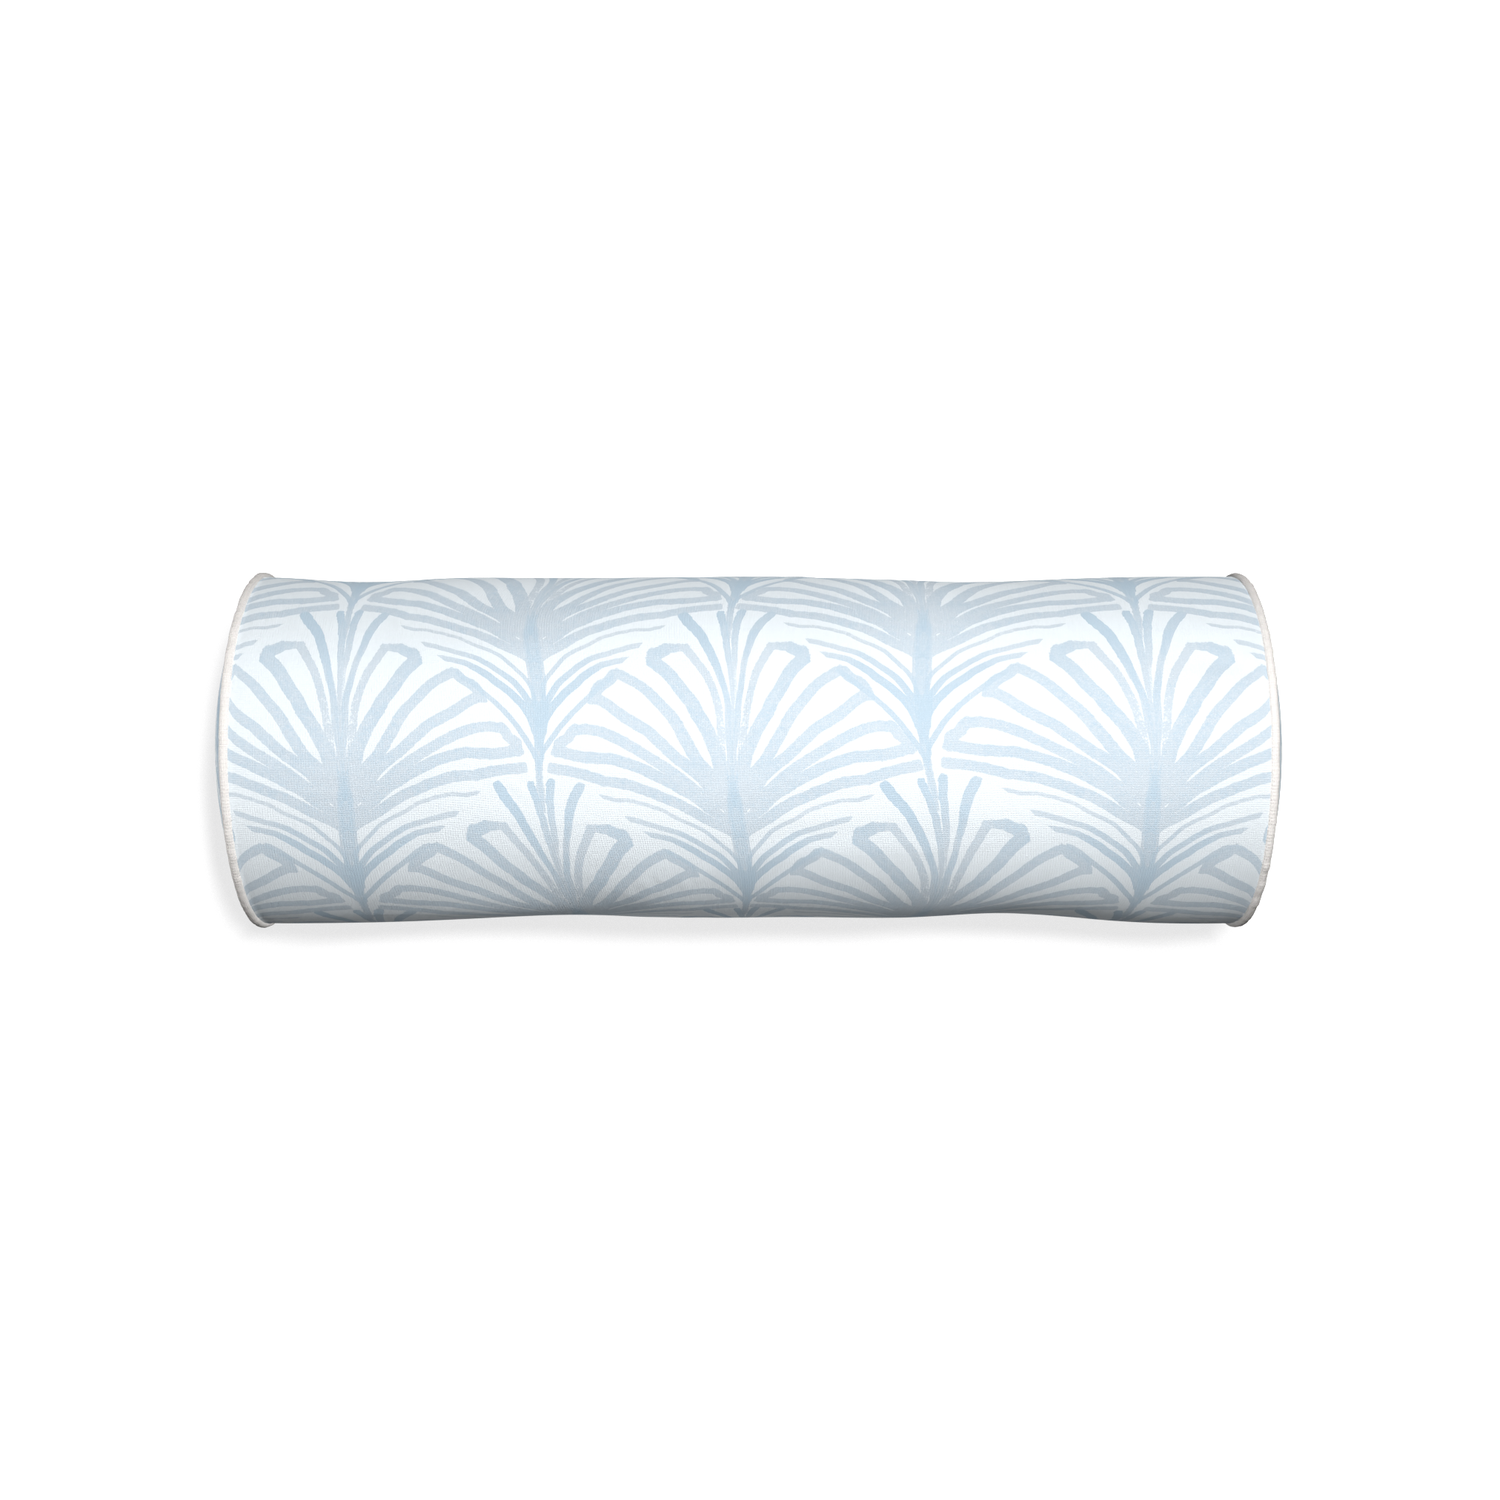 Bolster suzy sky custom pillow with snow piping on white background